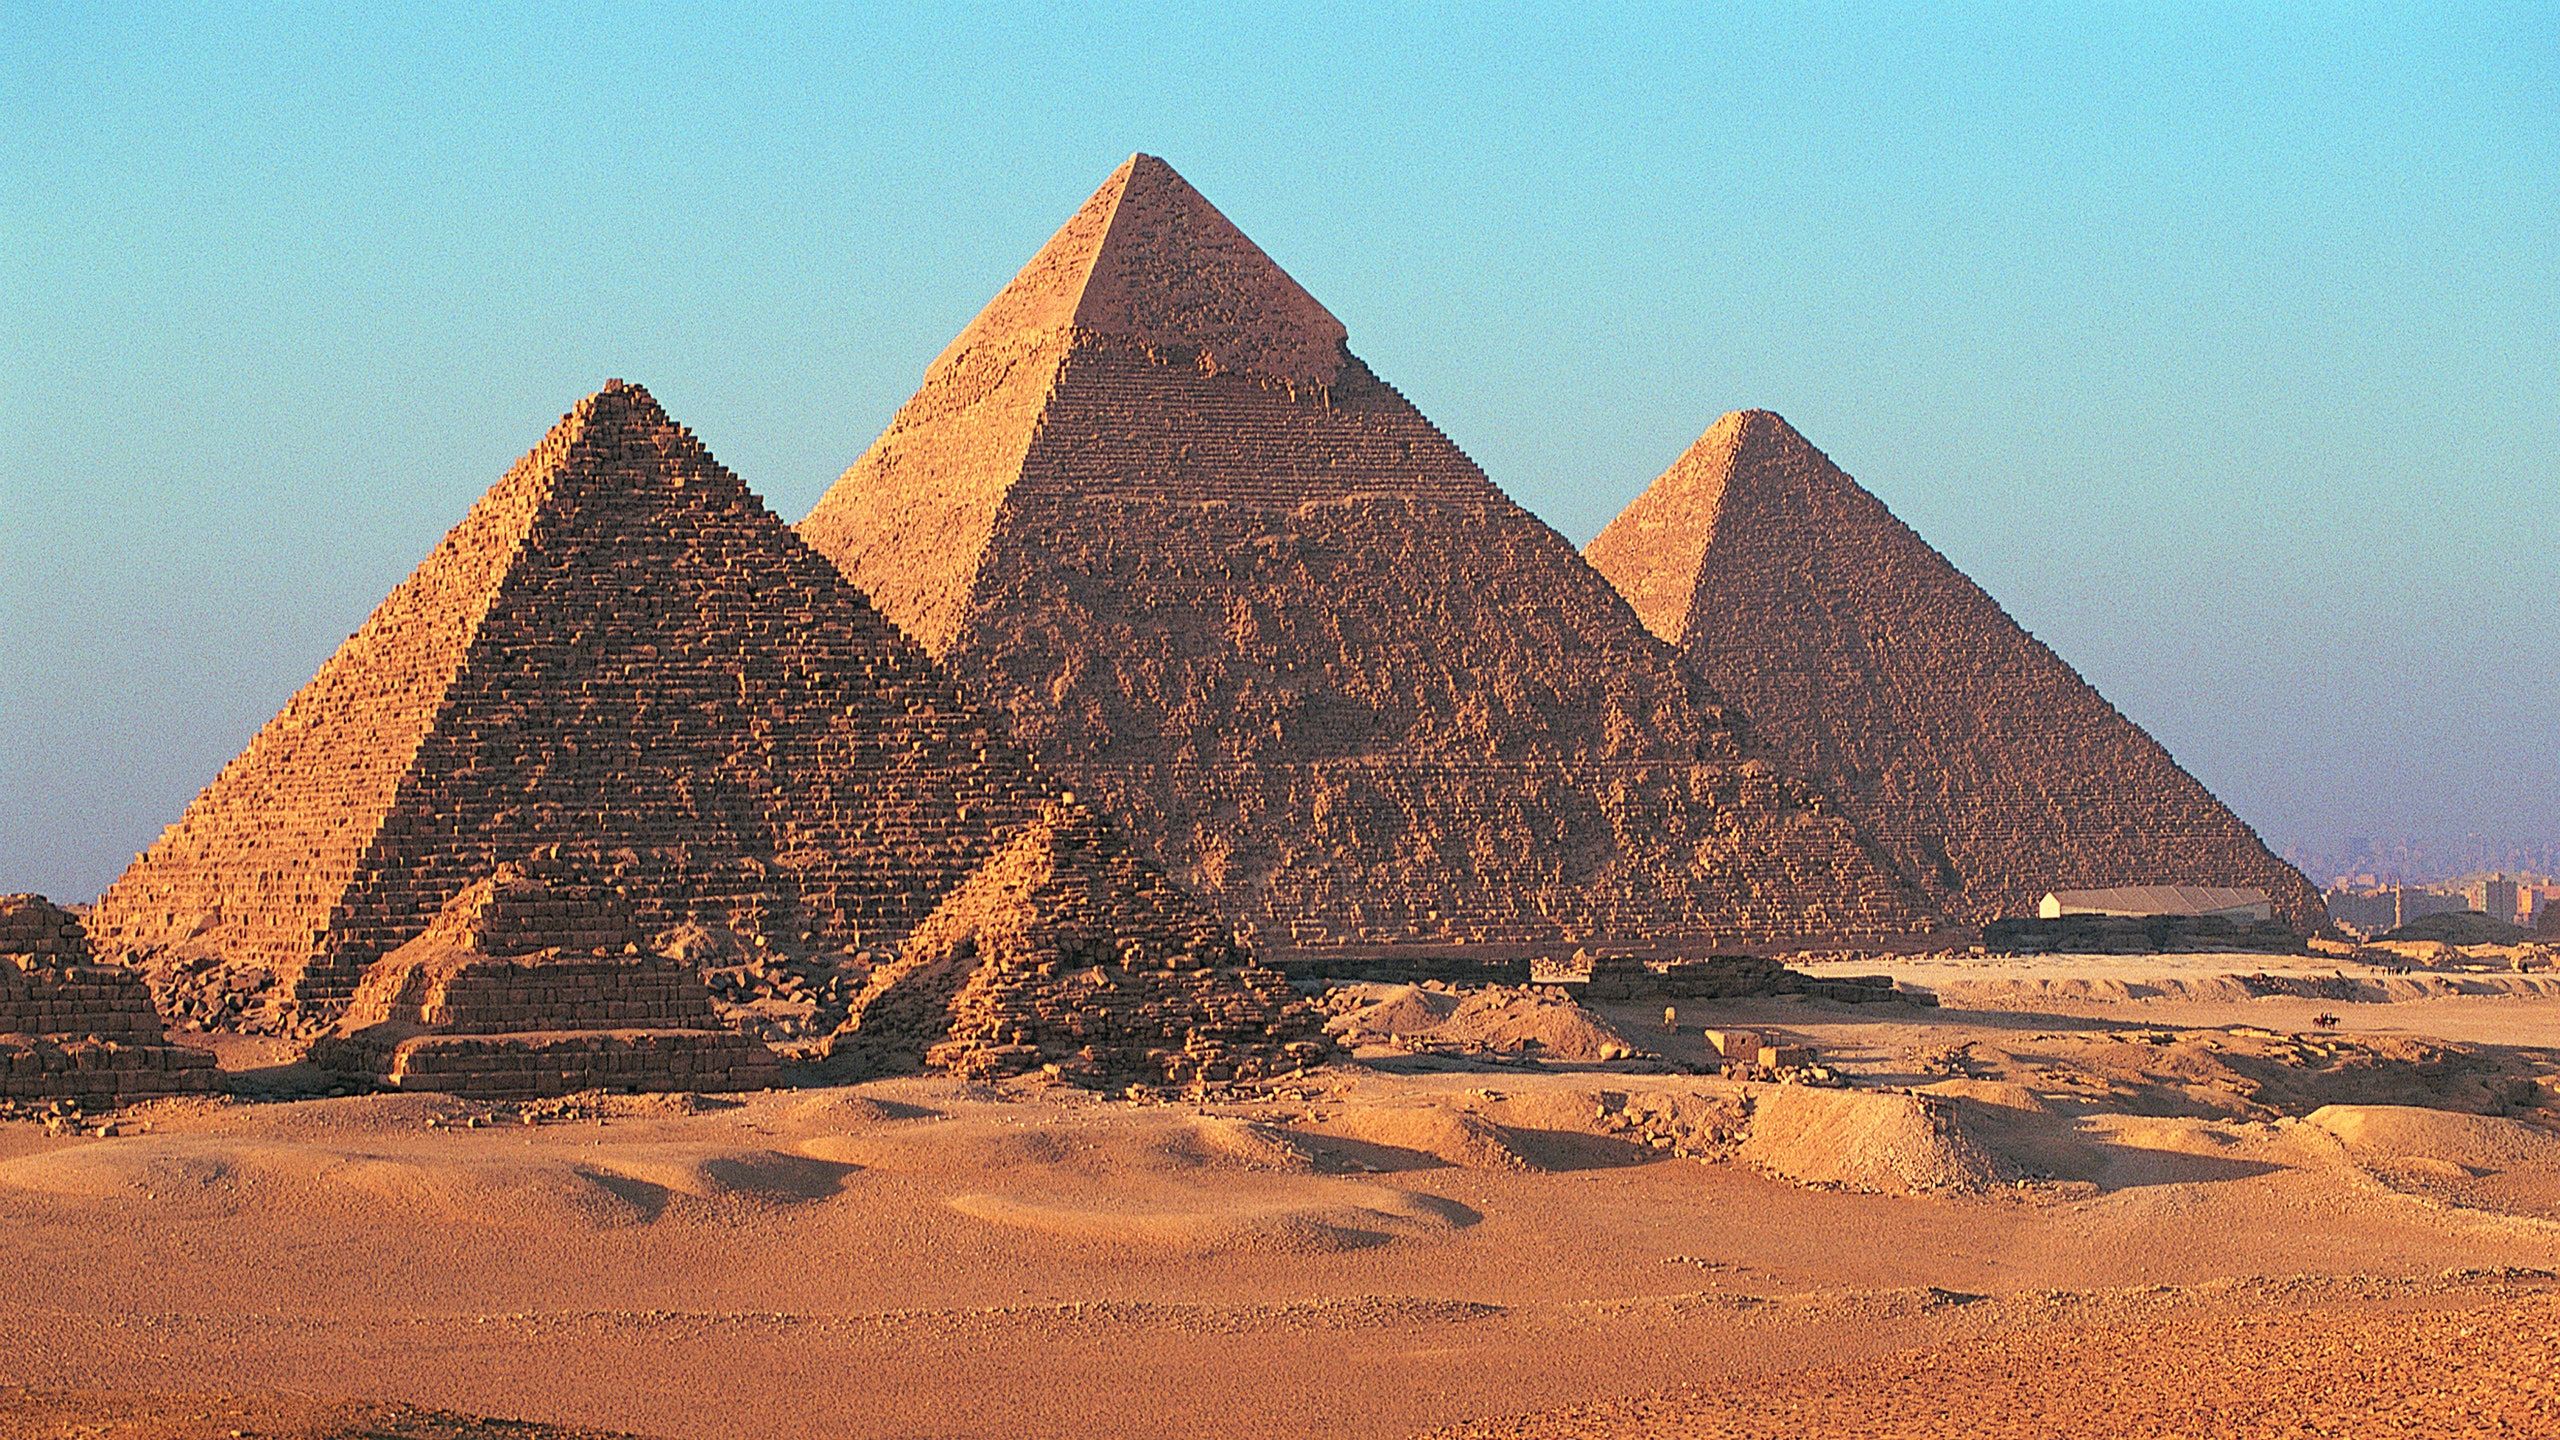 Scientists Might Have Discovered Secret Chambers in the Great Pyramid of Giza